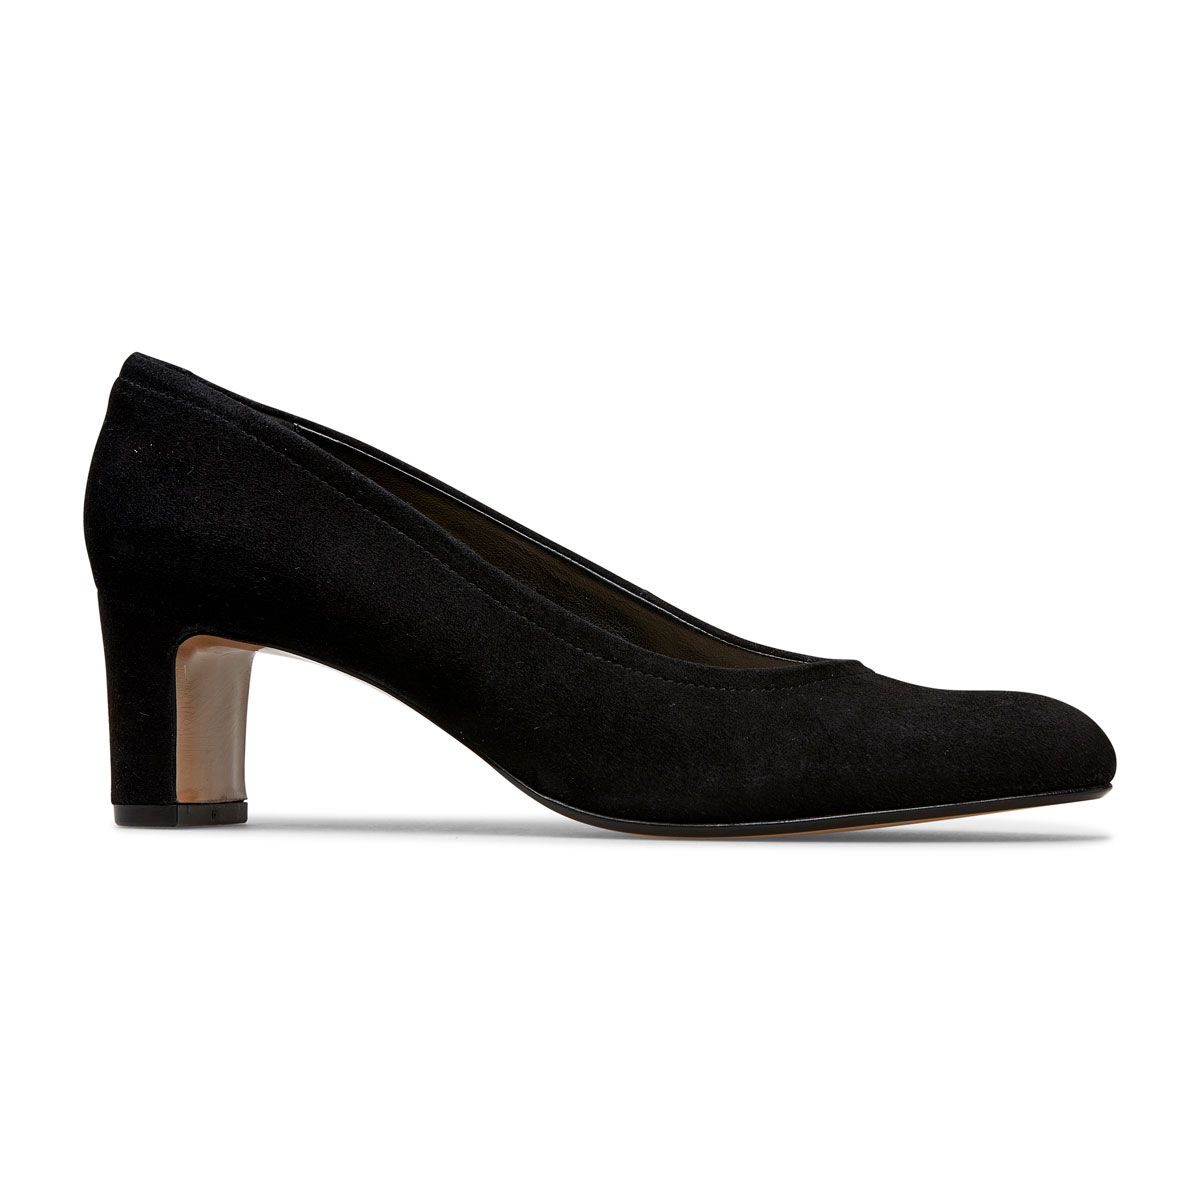 Woman's pointy pump shoe with V-cut in black suede block heel 8